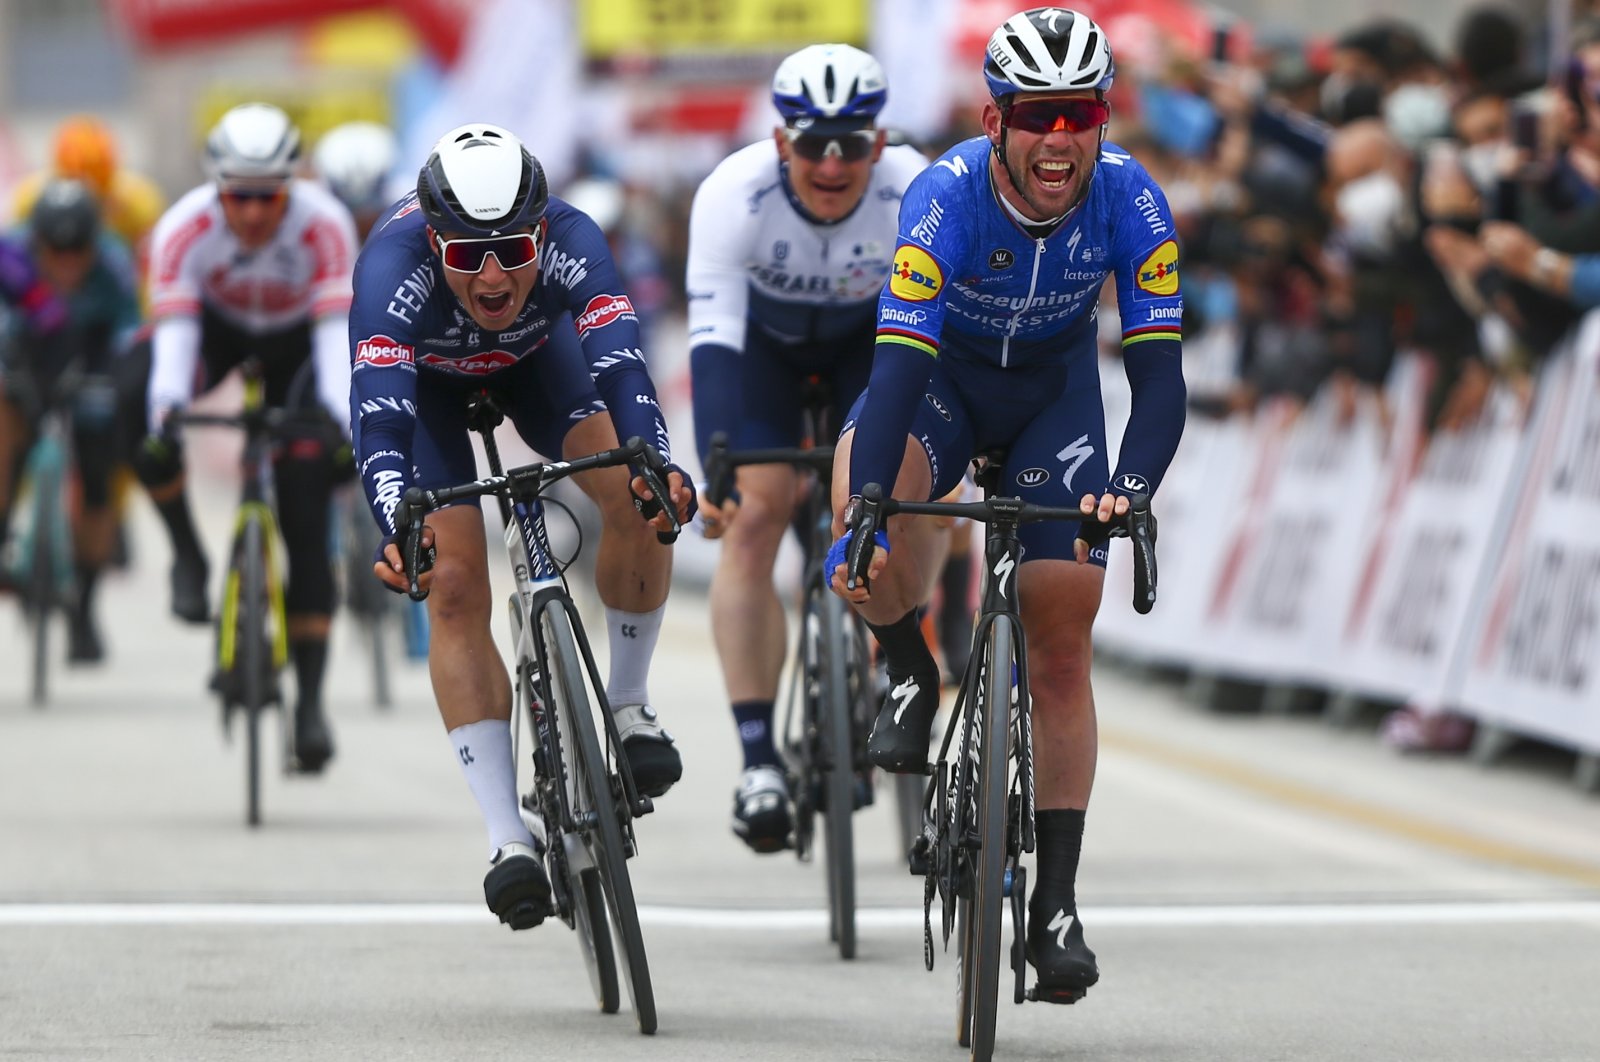 Belgian side Deceuninck-Quick-Step's British rider Mark Cavendish (R) nears the finish line to win the second stage of the 56th Presidential Cycling Tour of Turkey, Konya, central Turkey, April 12, 2021.